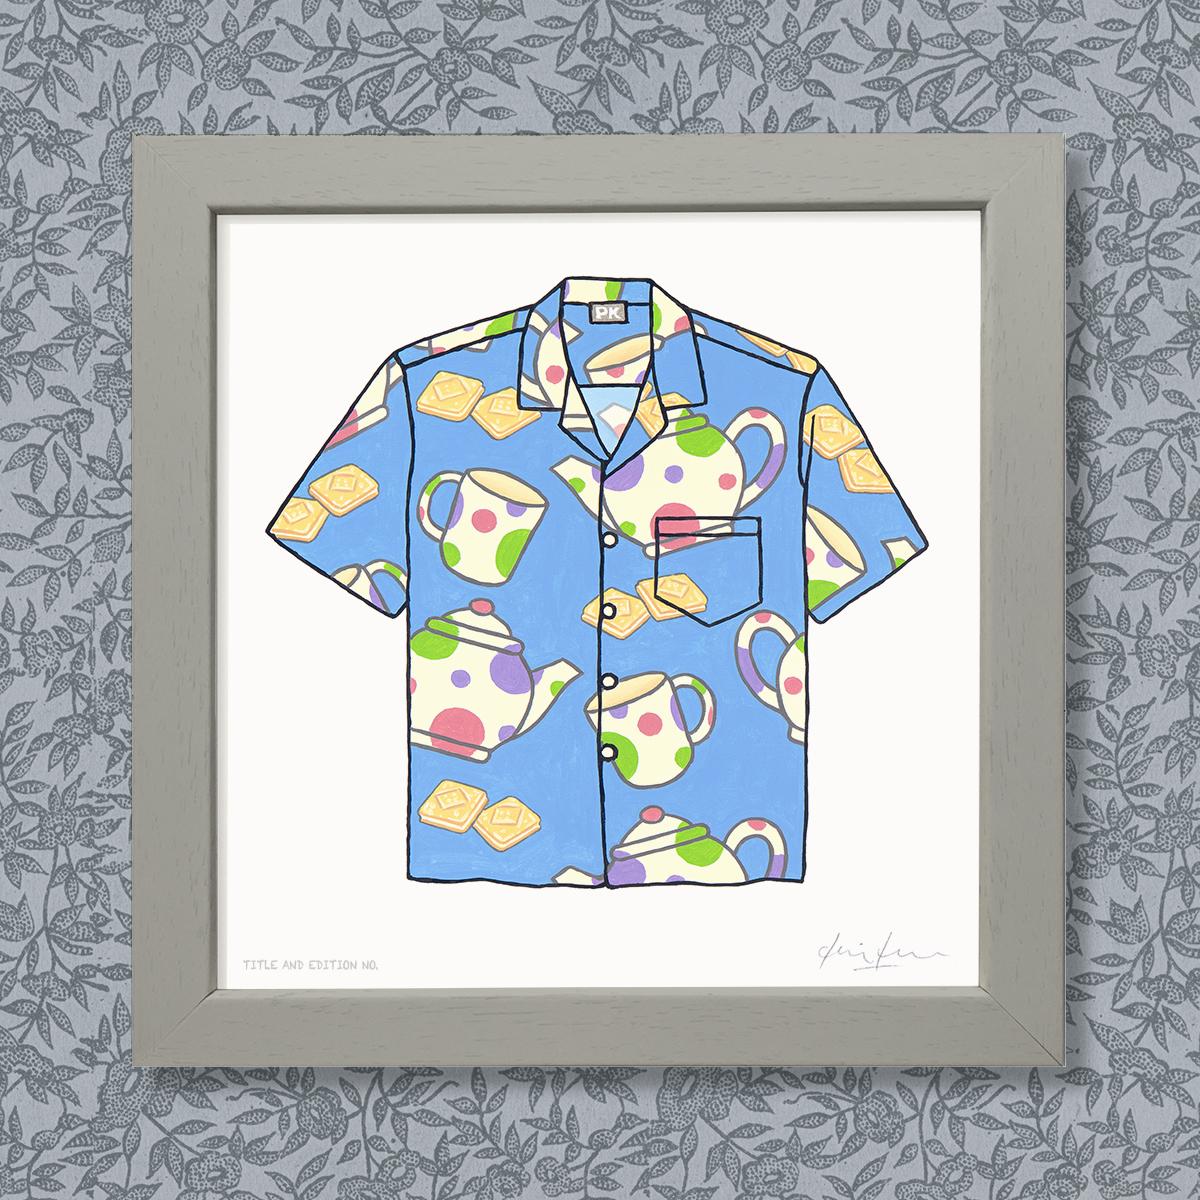 Limited edition print - Very Loud Shirt - in grey frame